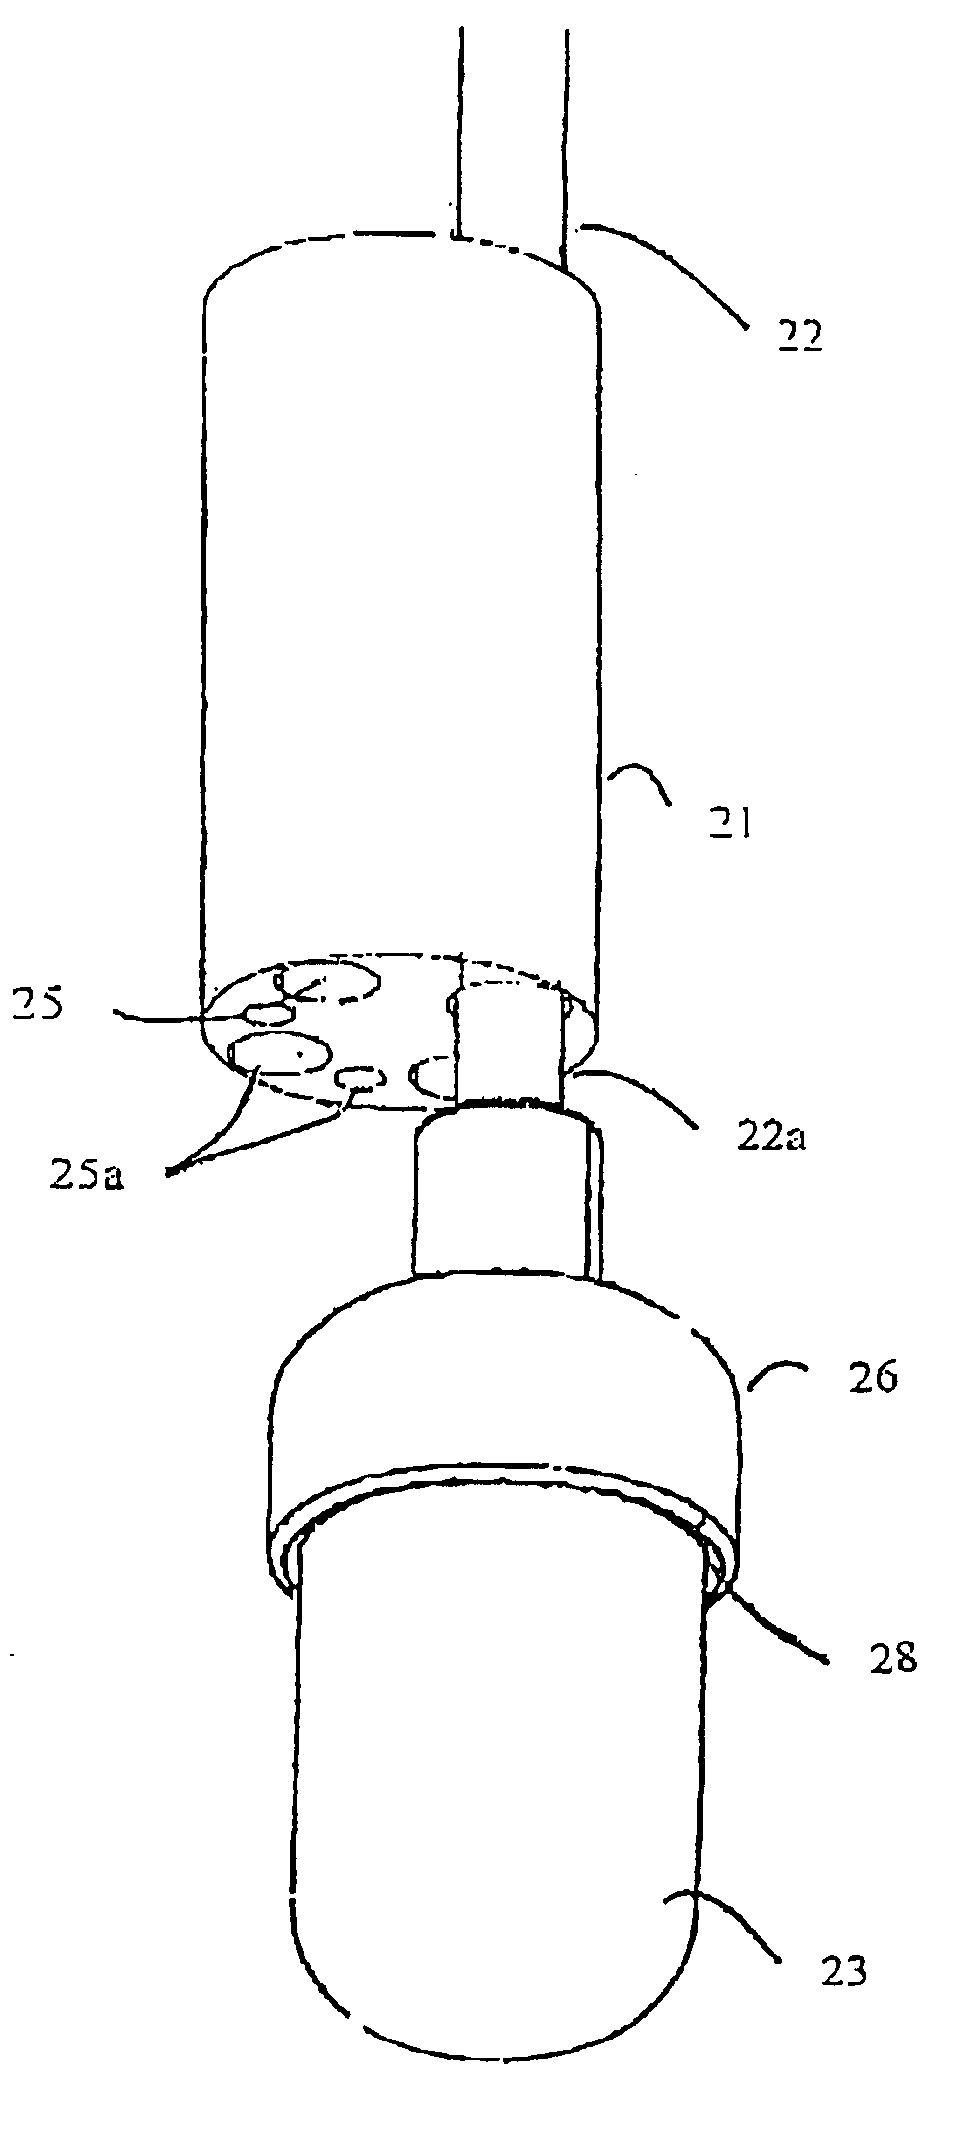 Device and method for positioning an object in a body lumen